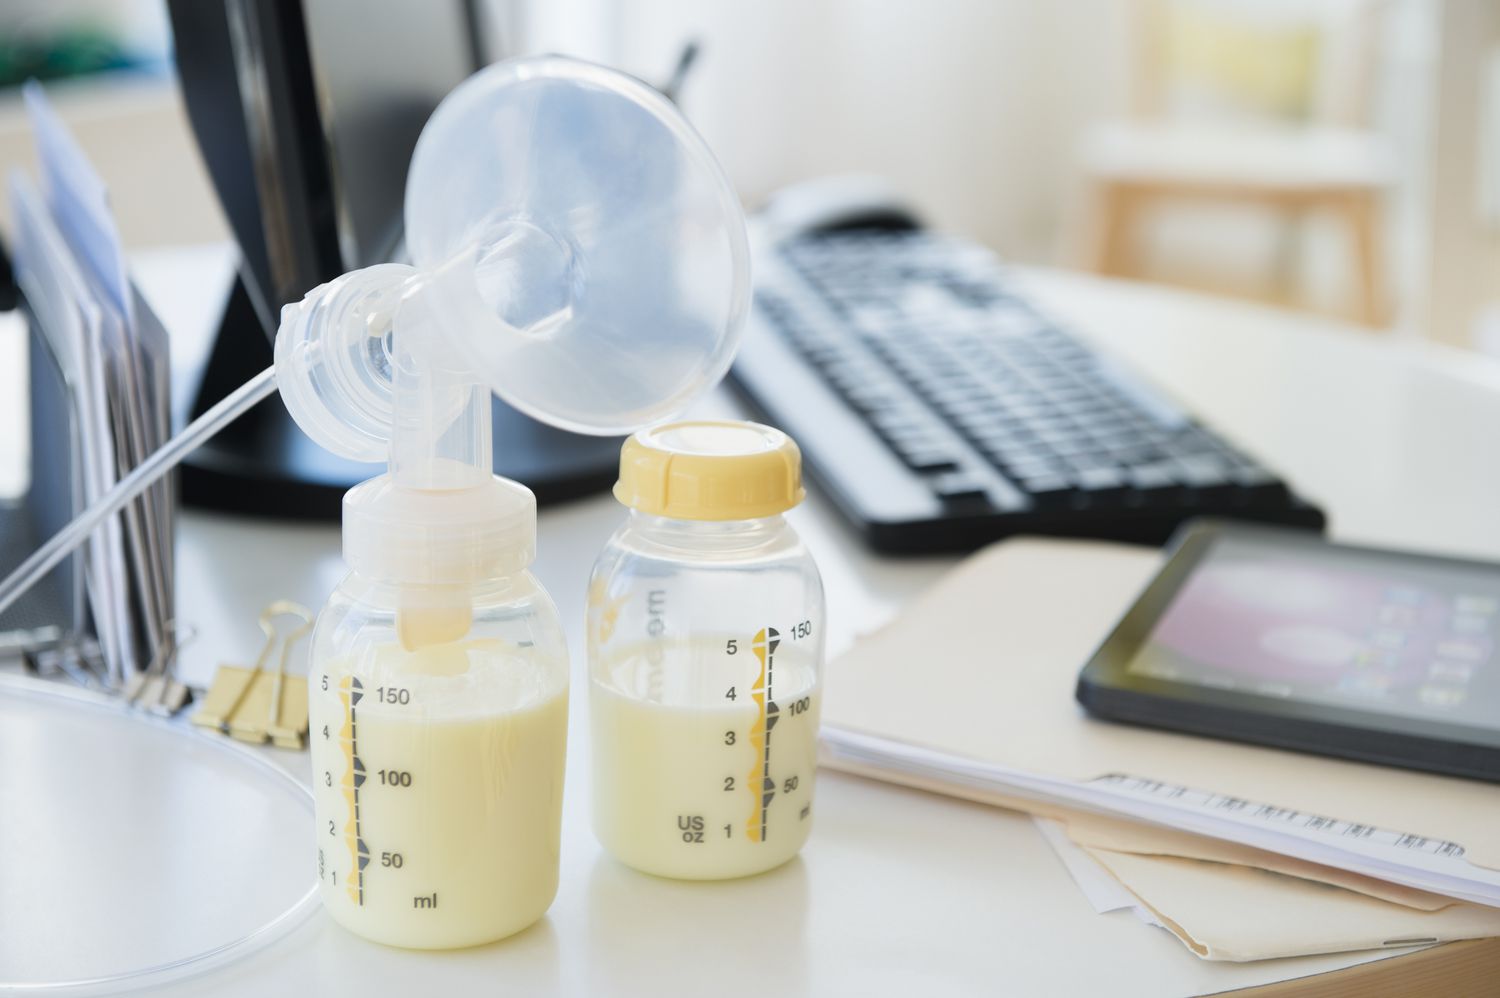 How To Store Breast Milk At Work